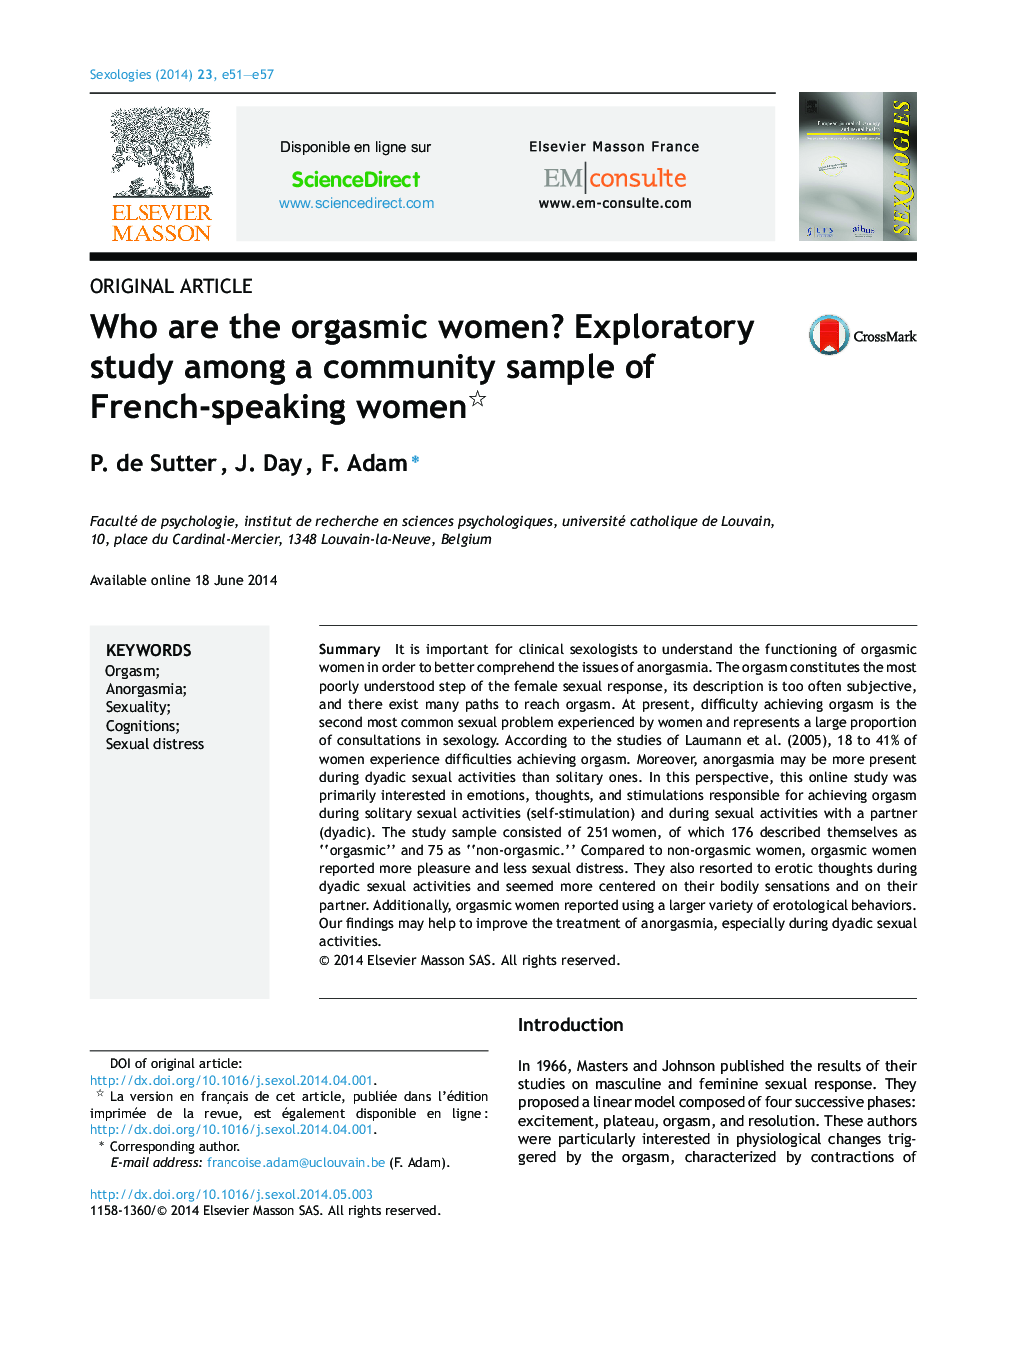 Who are the orgasmic women? Exploratory study among a community sample of French-speaking women 